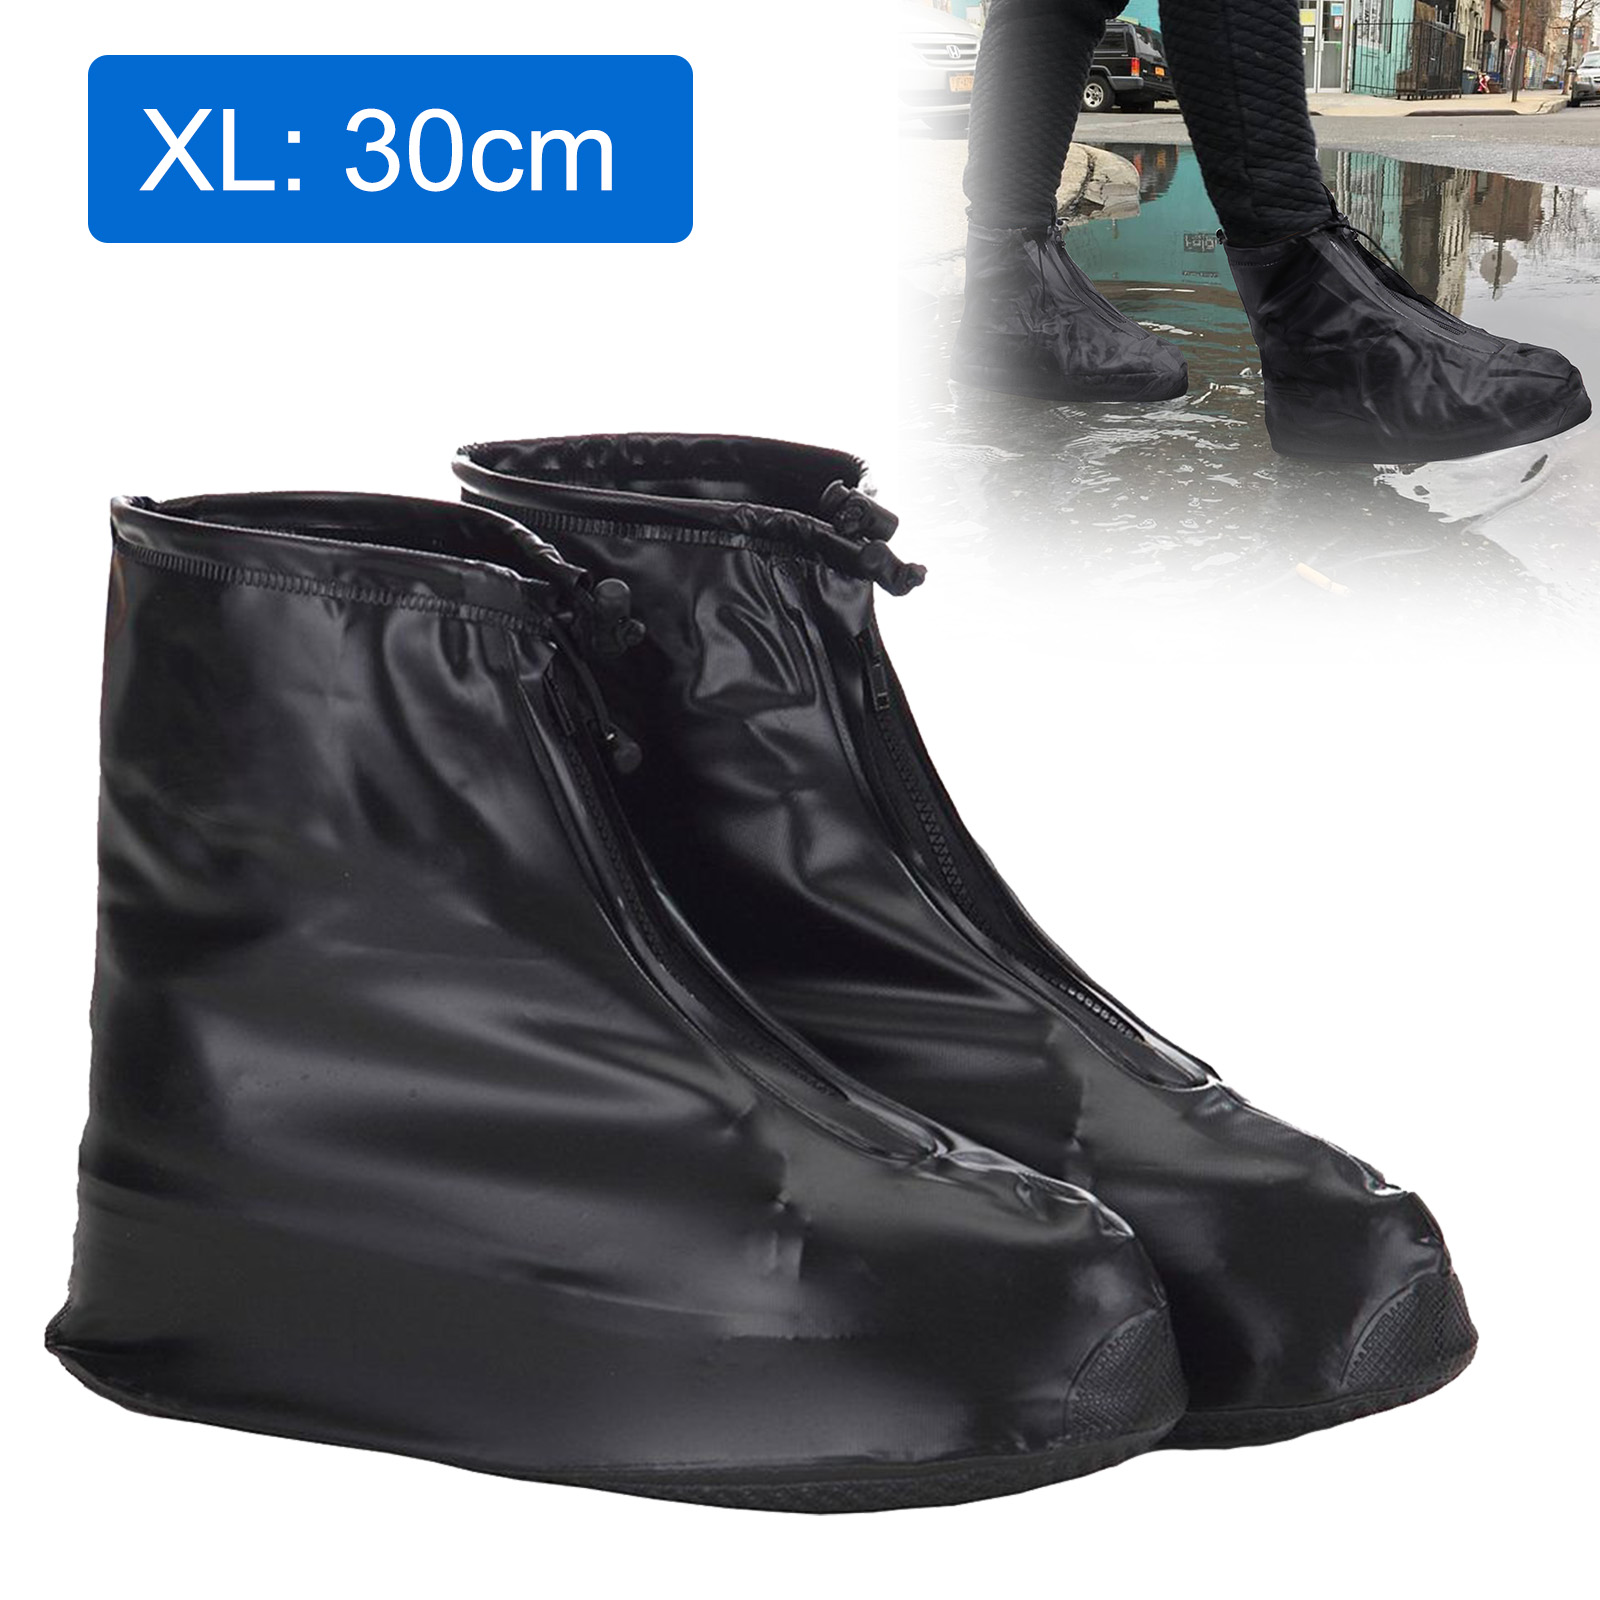 Outdoor Rain Waterproof Boots Shoes Covers Reusable Non-Skid Cycling Overshoes 